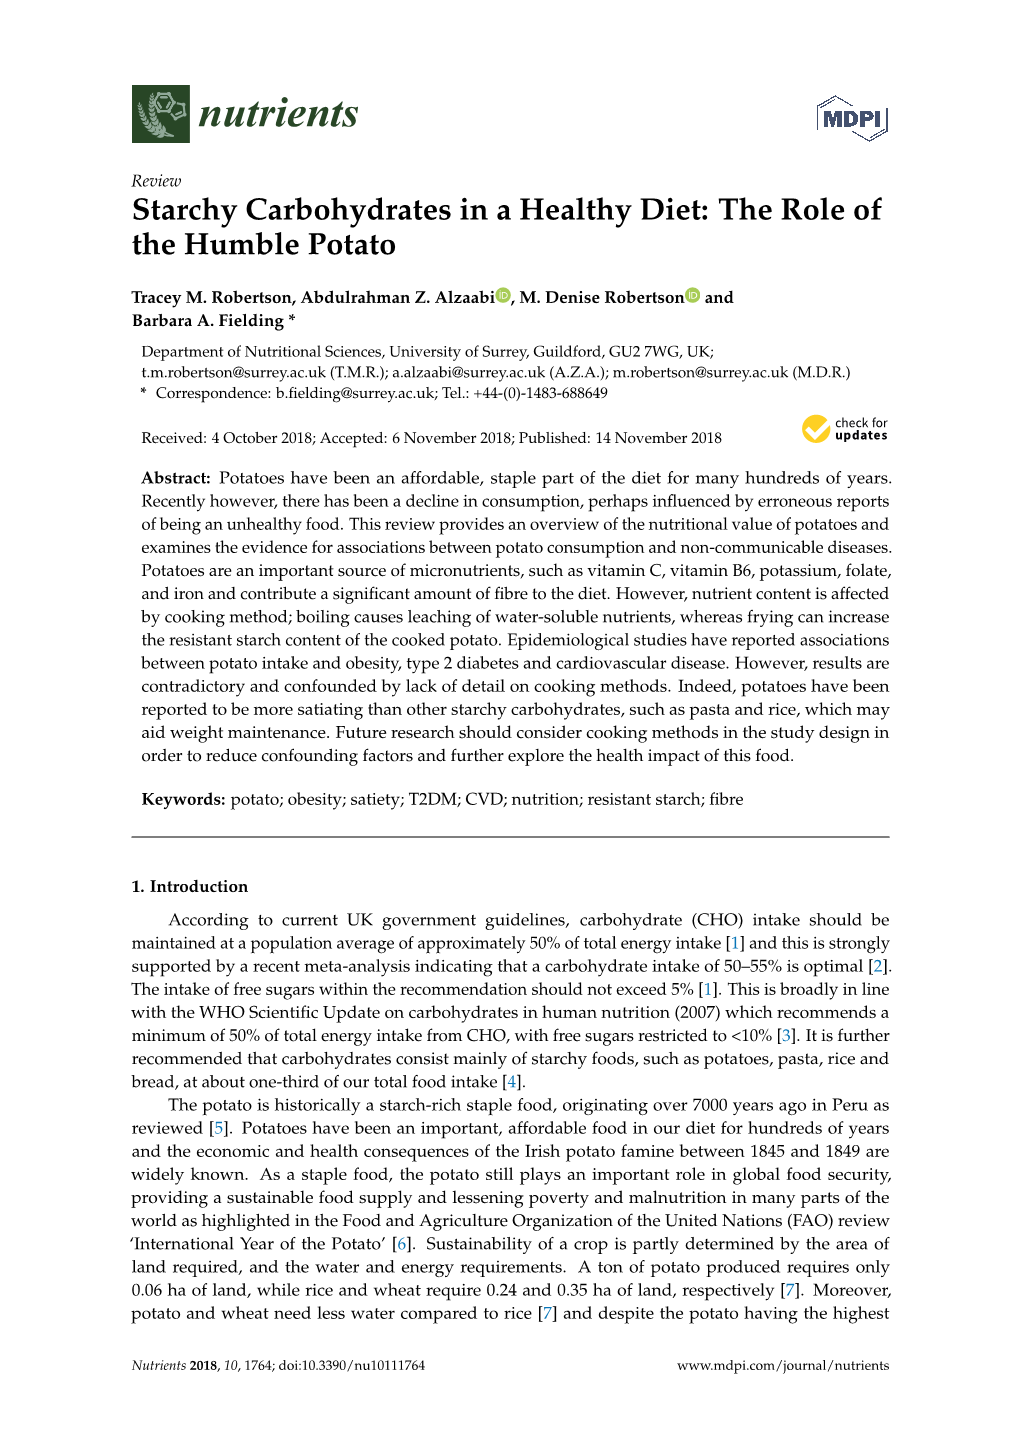 Starchy Carbohydrates in a Healthy Diet: the Role of the Humble Potato